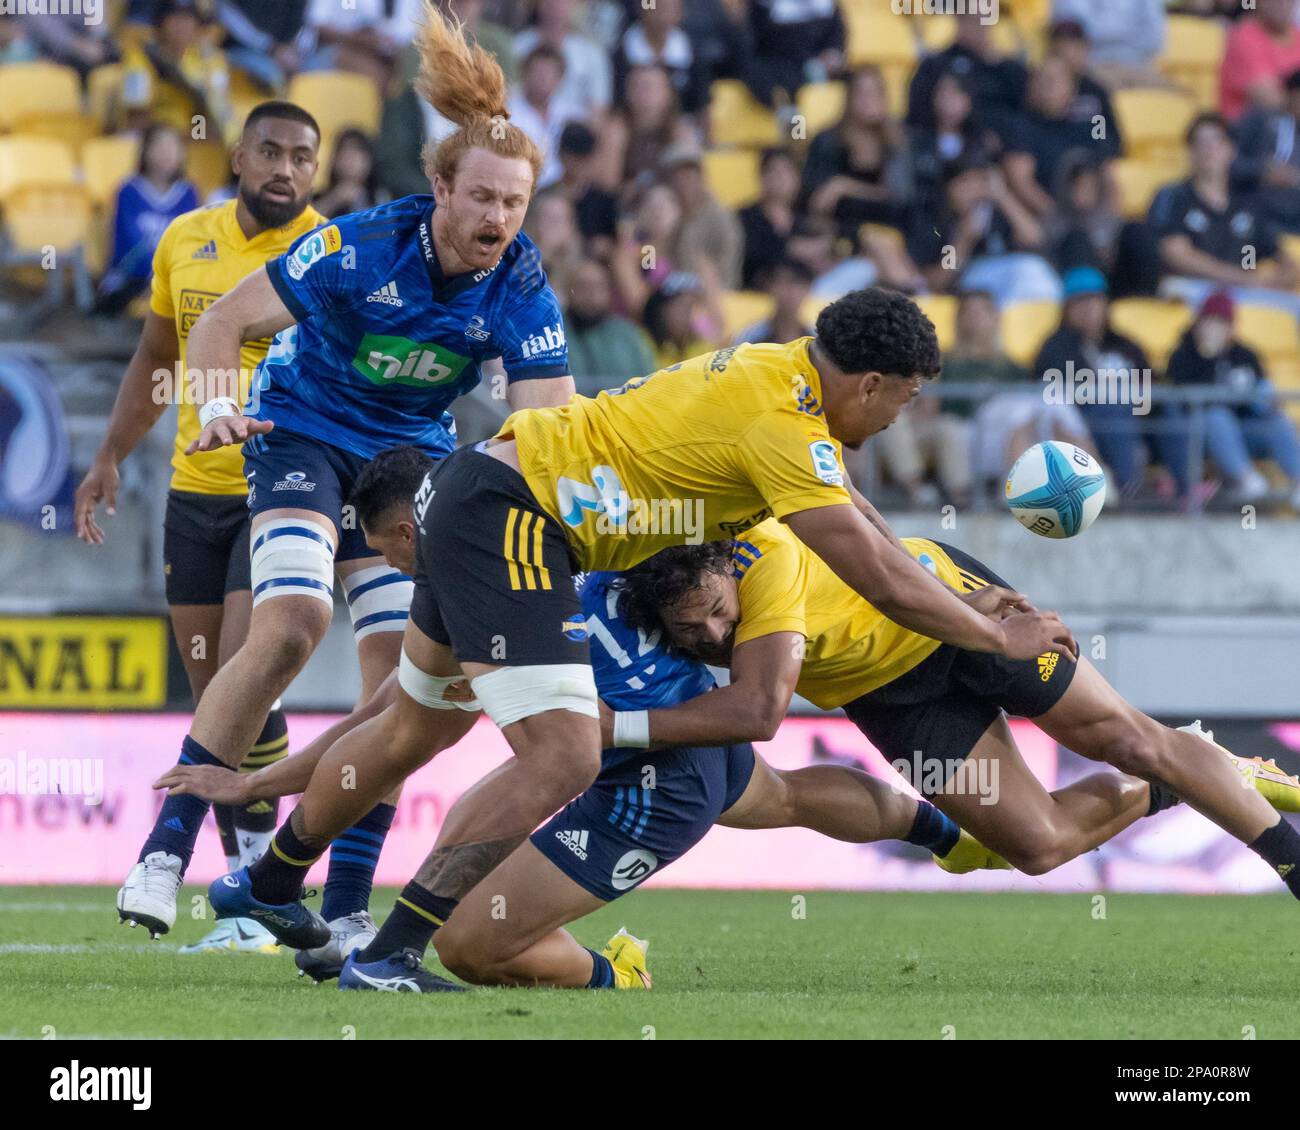 March 11, 2023, Wellington, Te Whanganui-a-Tara, New Zealand Wellington, New Zealand, 11 March 2023 Roger Tuivasa-Sheck (12 Auckland Blues) gets hit hard by two defenders